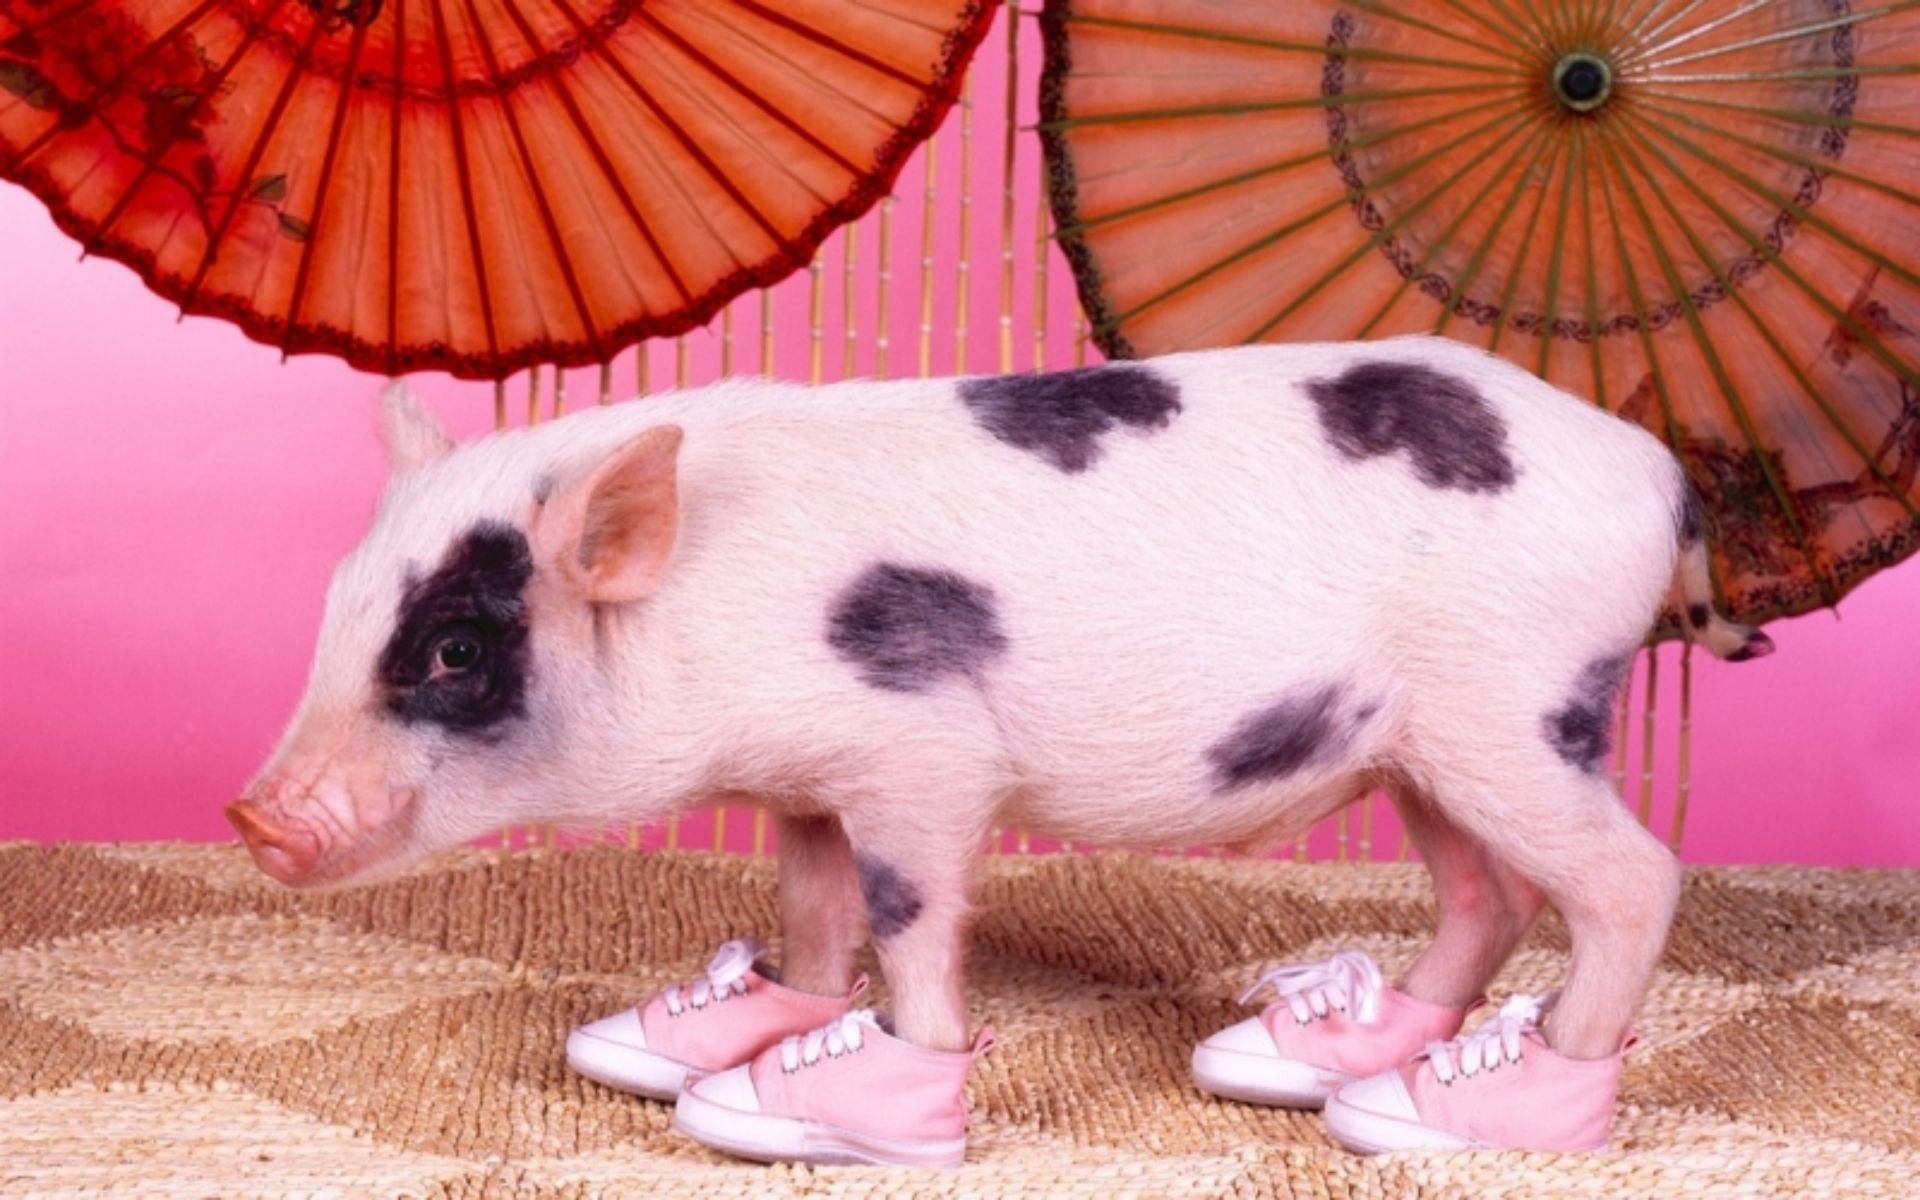 Pigs dressed in clothes